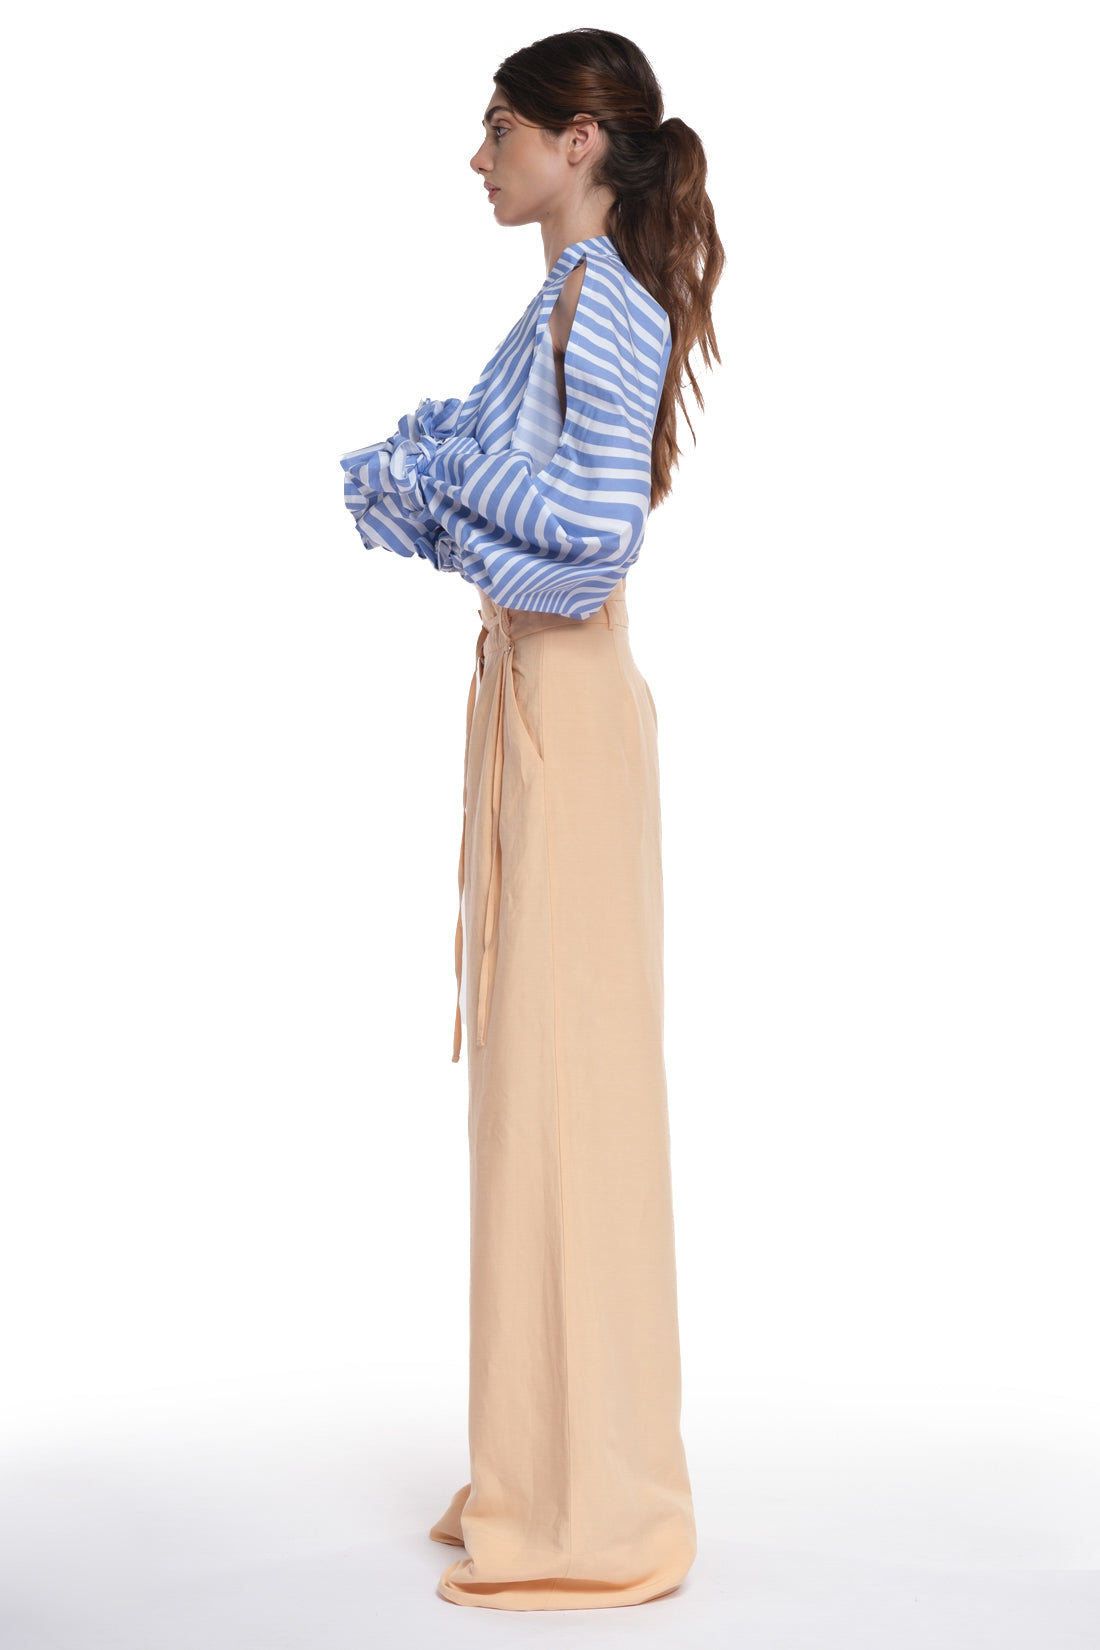 LONG HIGH-WAISTED PANTS WITH THIN BELT AND DETAILS IN FRONT